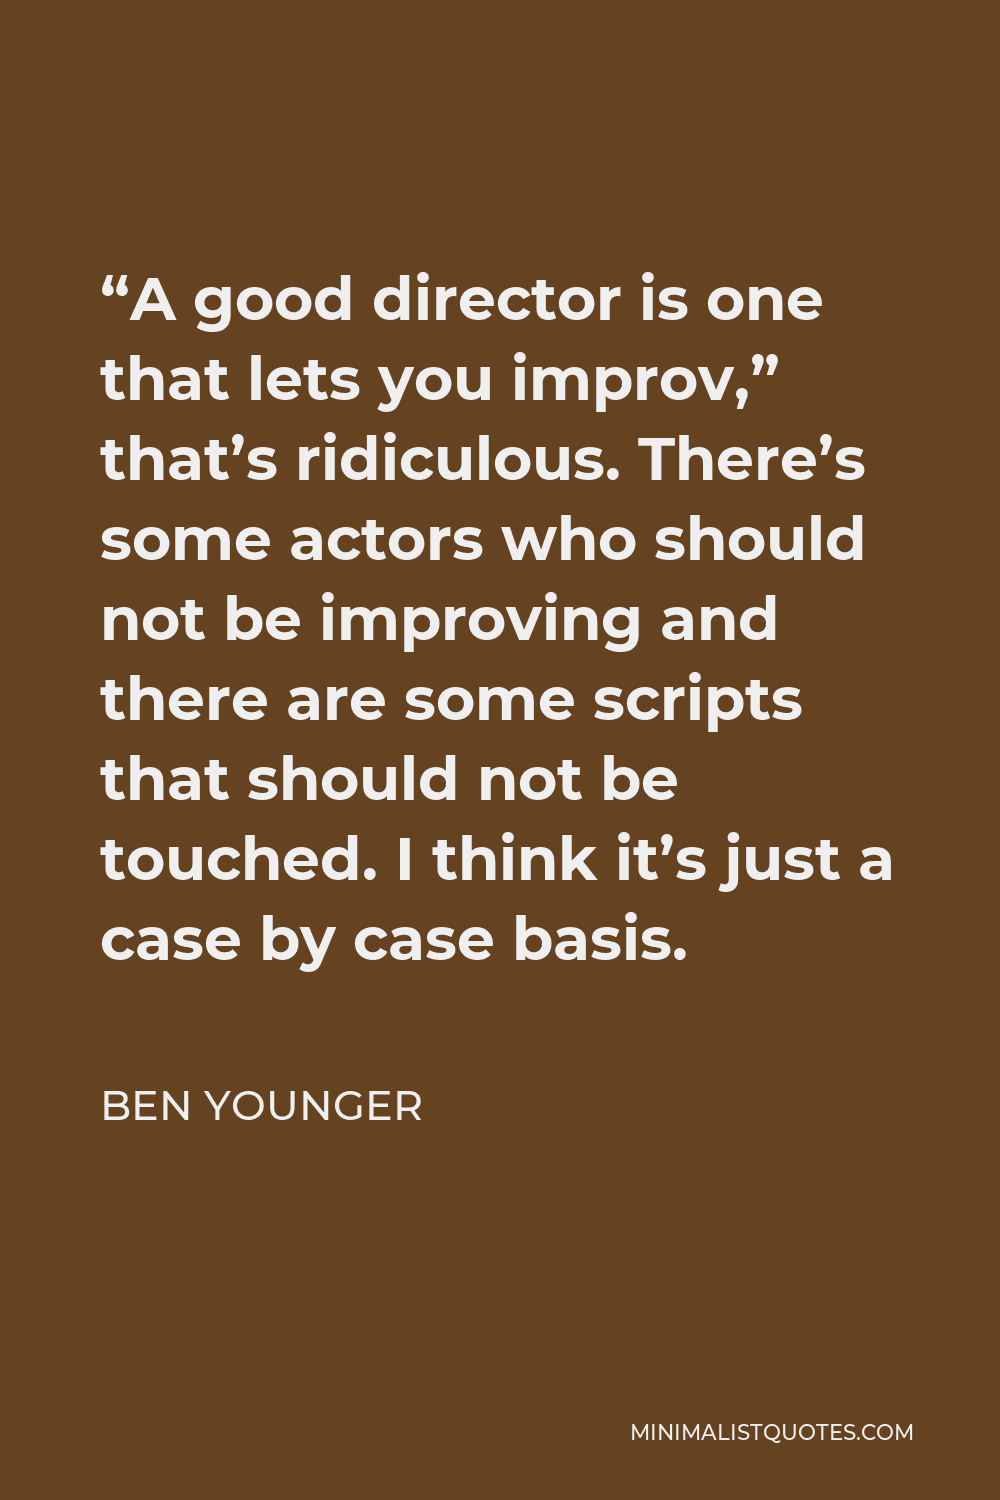 Ben Younger Quote - “A good director is one that lets you improv,” that’s ridiculous. There’s some actors who should not be improving and there are some scripts that should not be touched. I think it’s just a case by case basis.